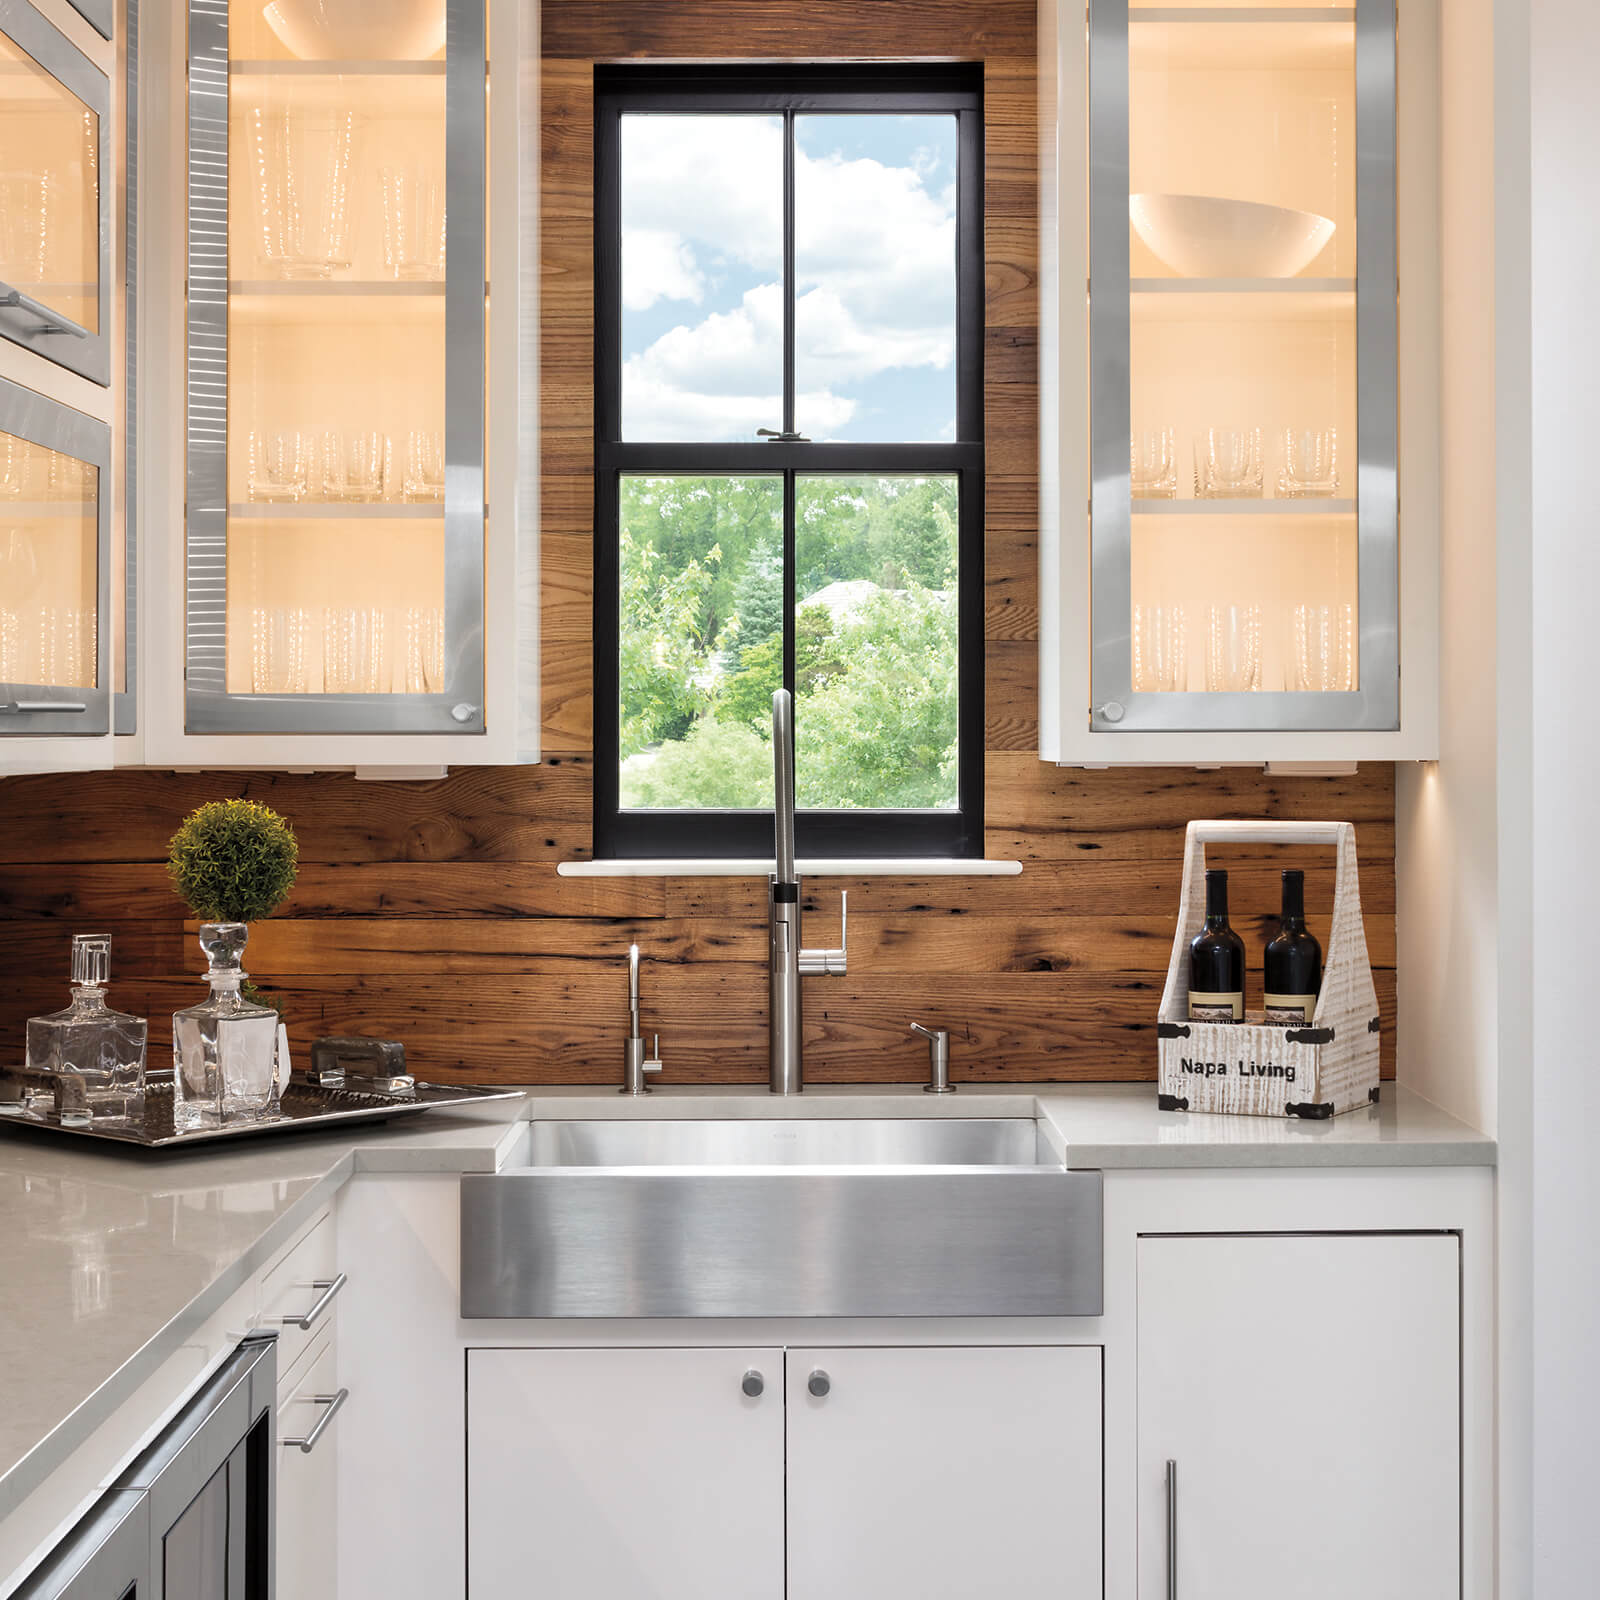 Kitchen with Marvin Signature Ultimate Double Hung G2 Window above modern farm style sink